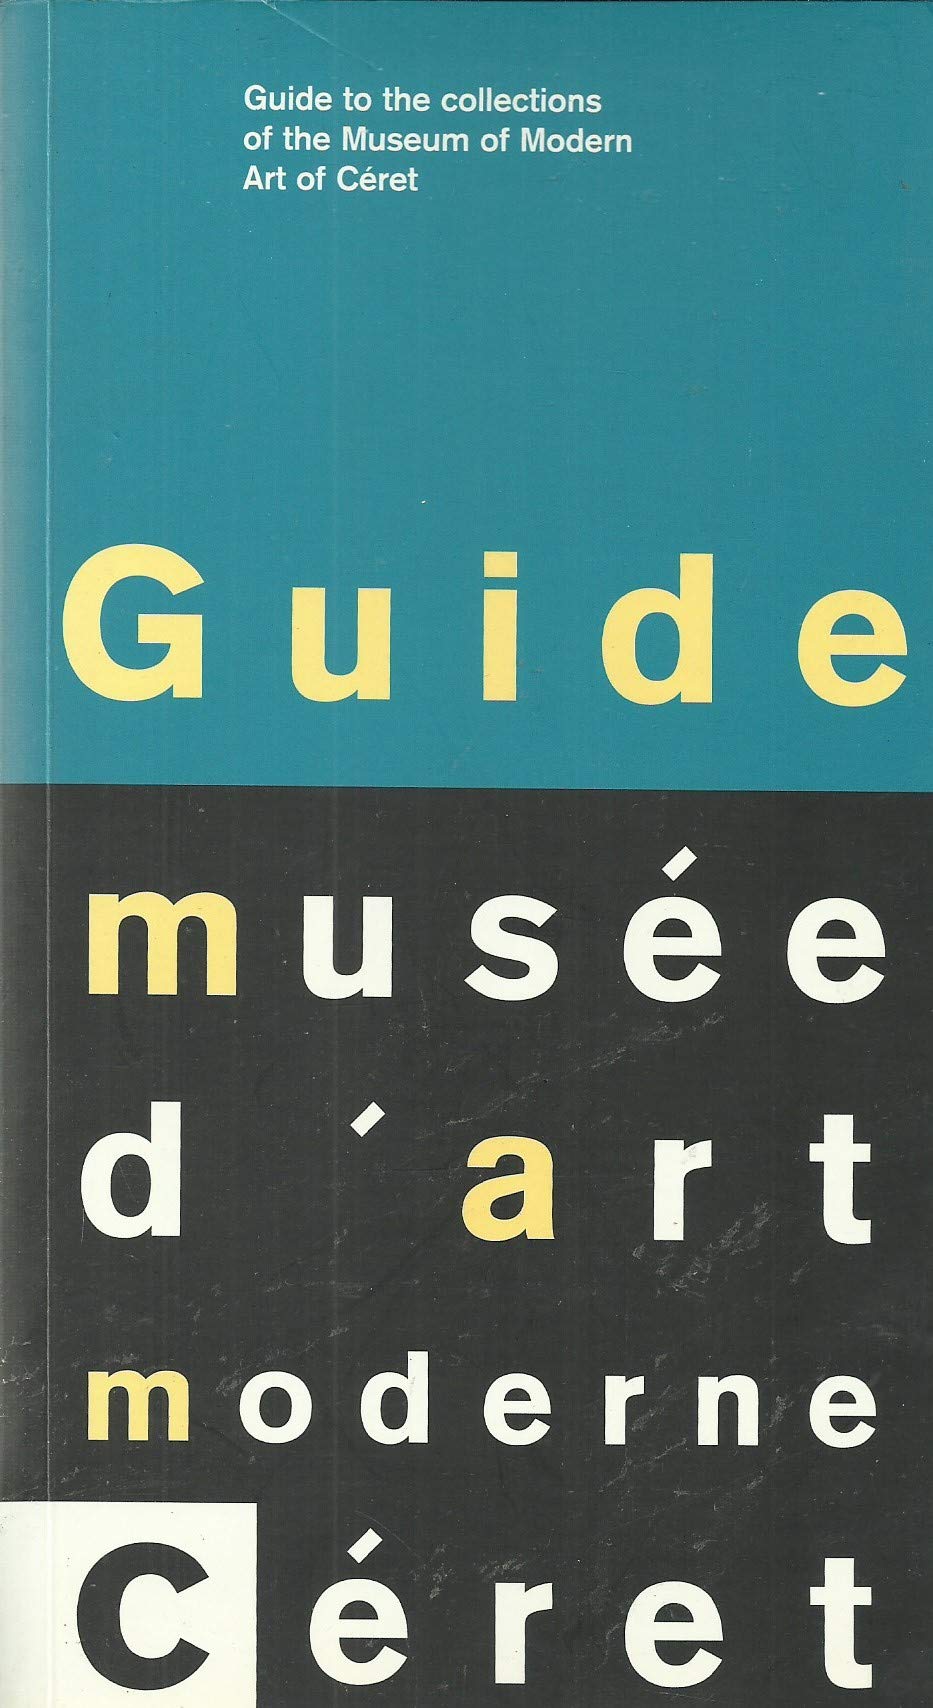 Guide du musée d'art moderne de Céret/Guide to the Collections of the Museum of Modern Art of Céret